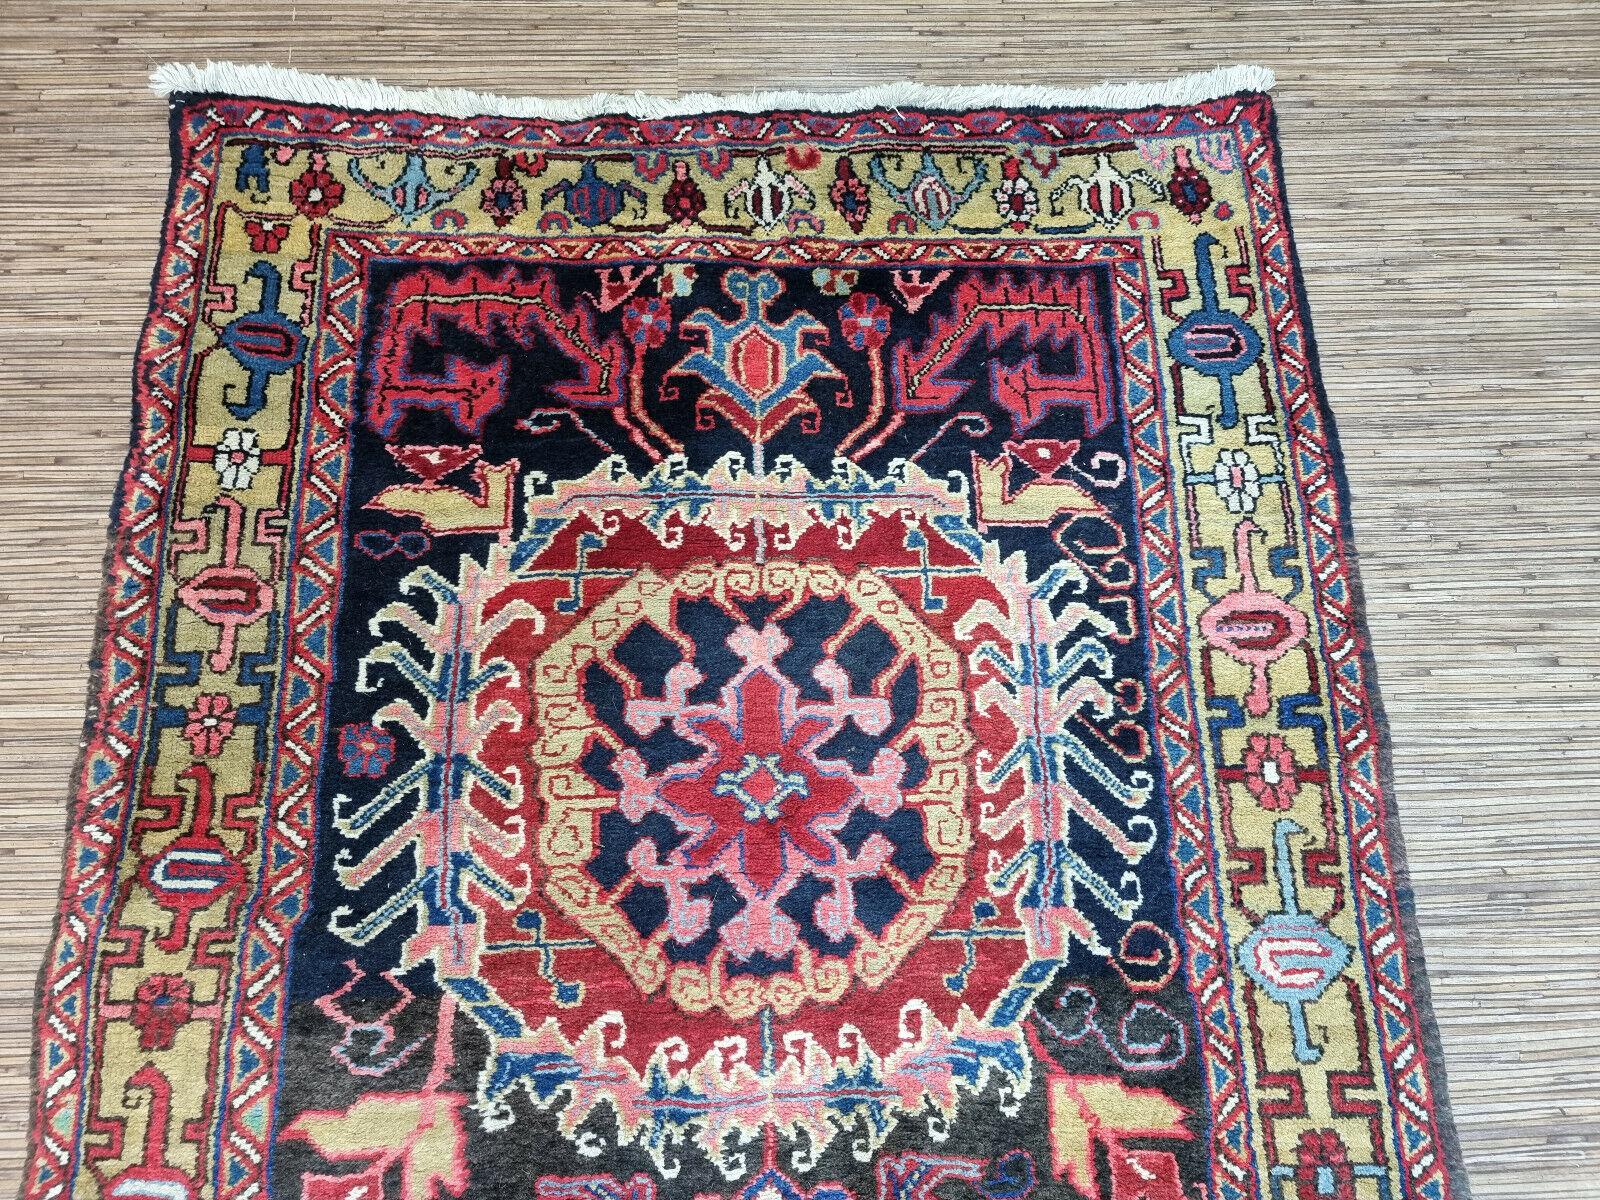 Early 20th Century Handmade Antique Persian Style Heriz Runner Rug 3.7' x 12.1', 1920s - 1D78 For Sale